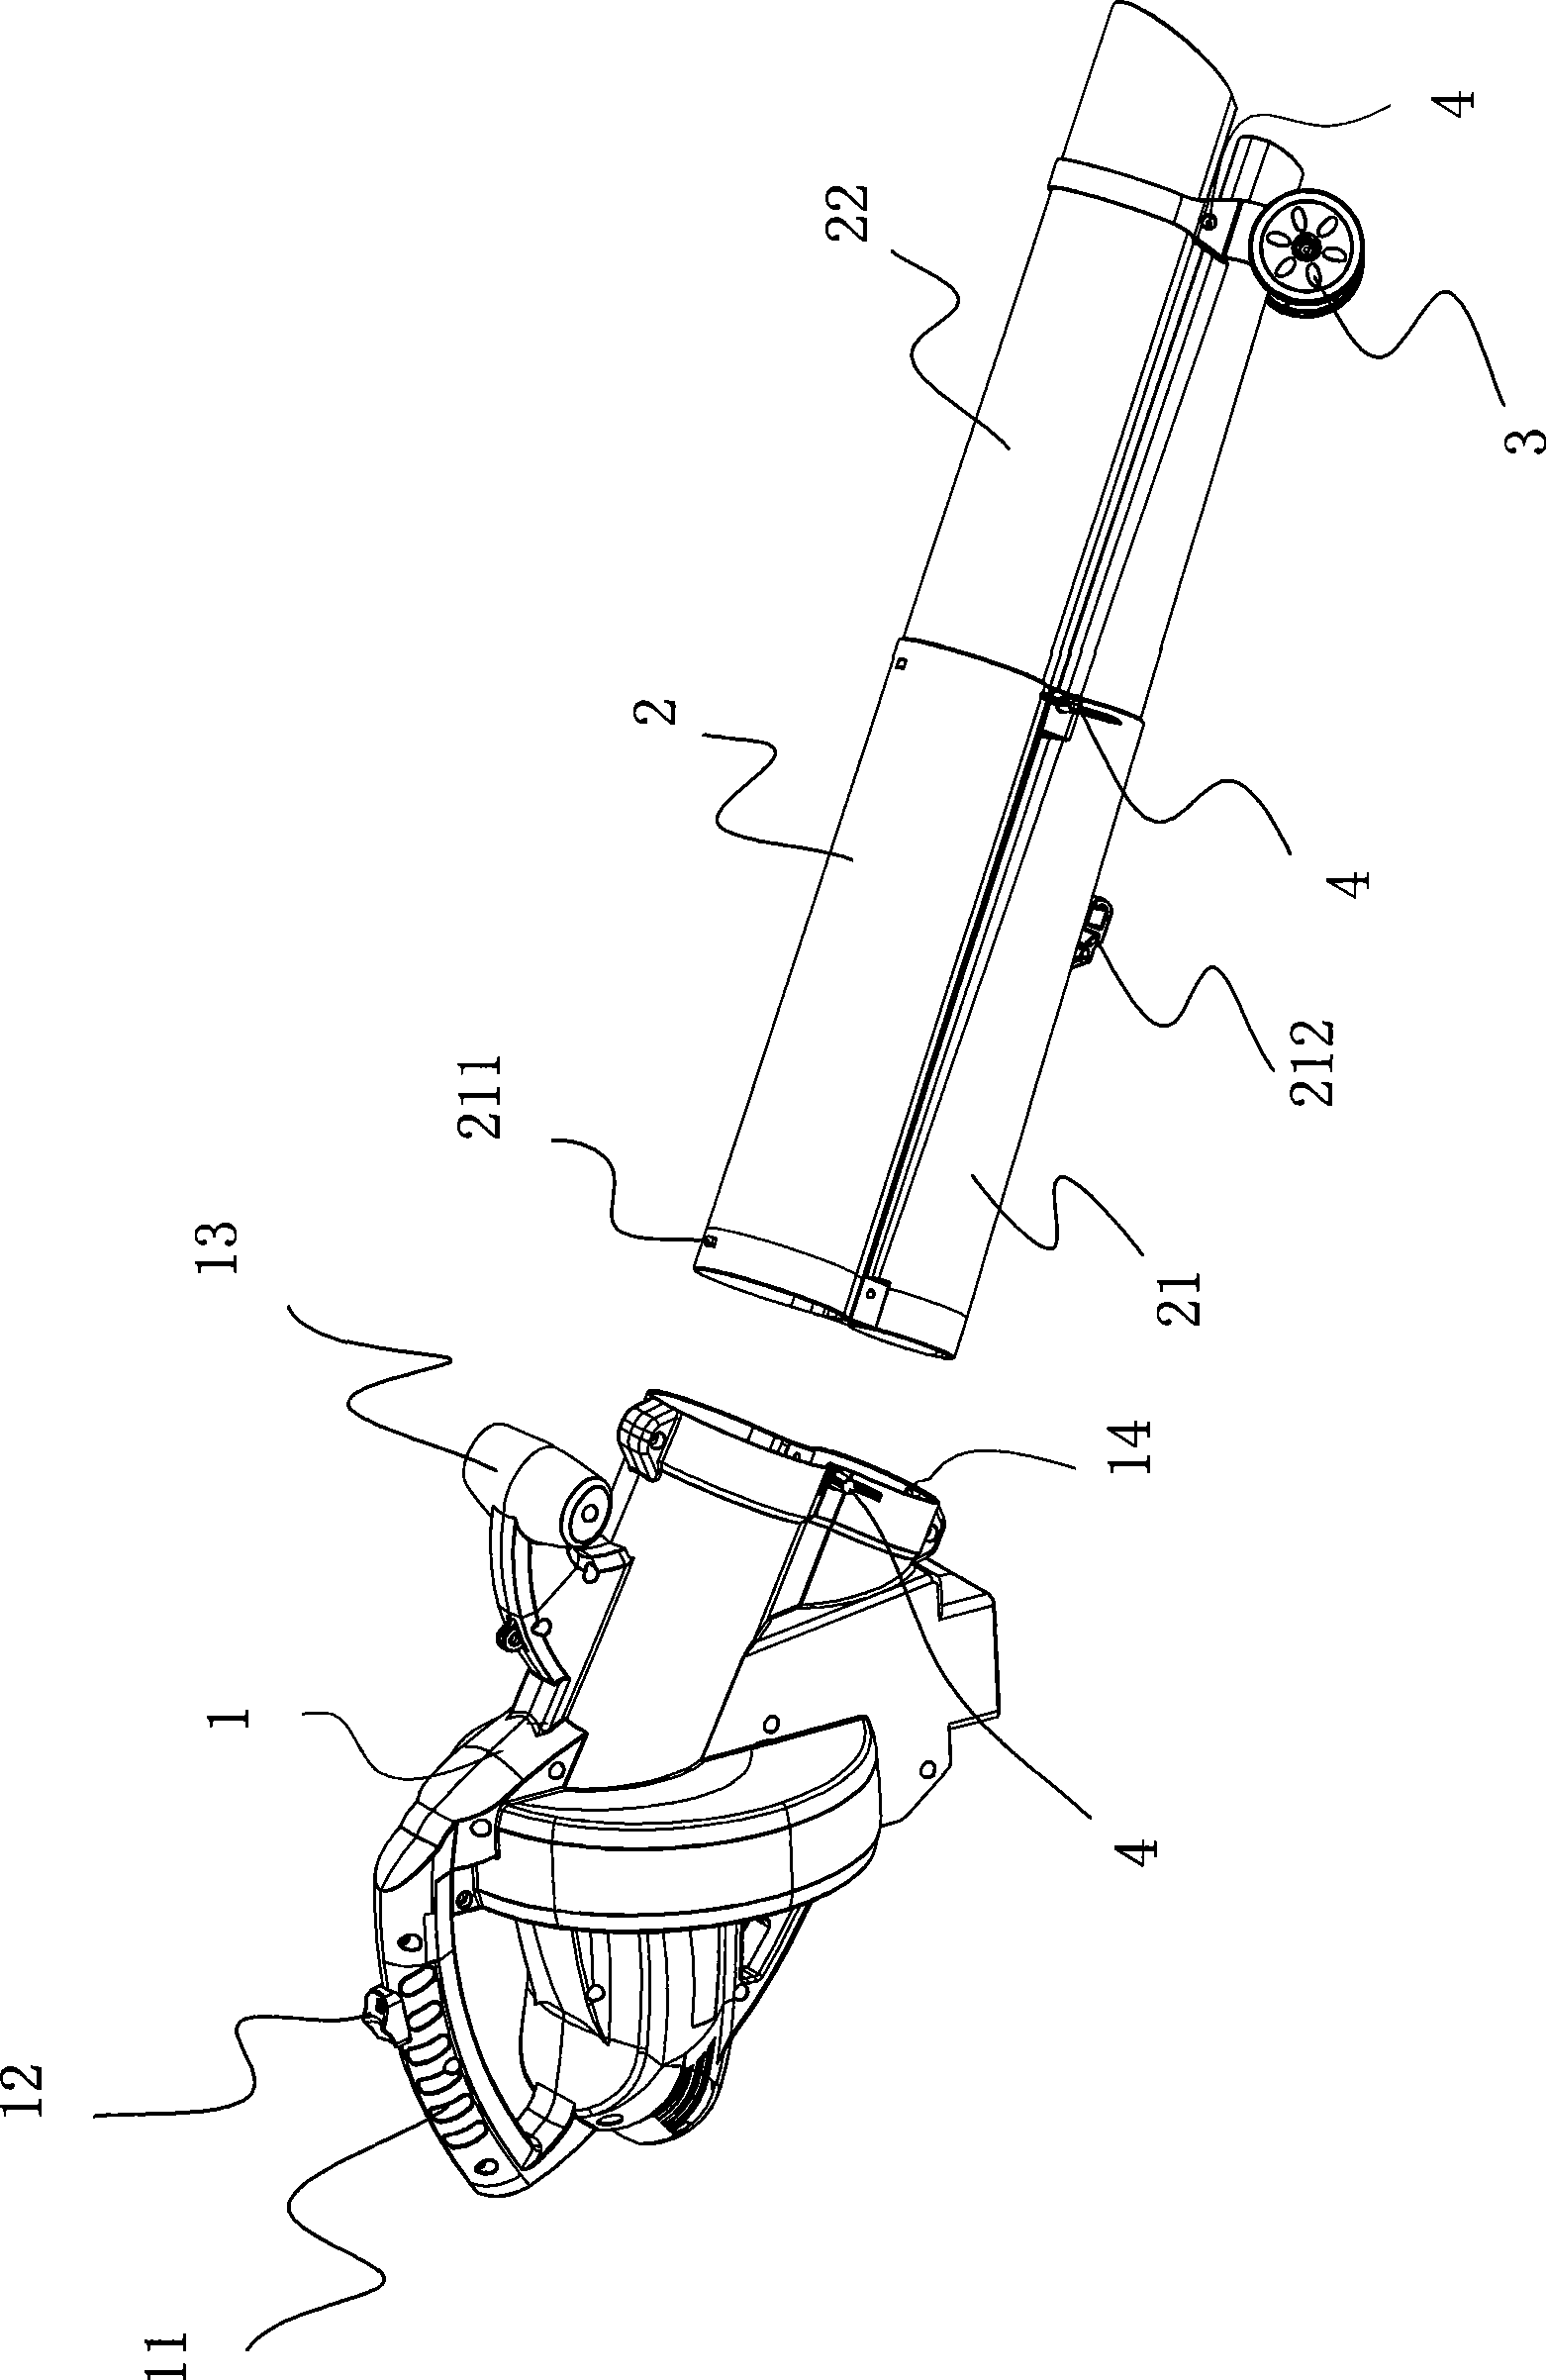 Foliage pressure-vacuum machine with sleeved wind pipe and dismountable wheel